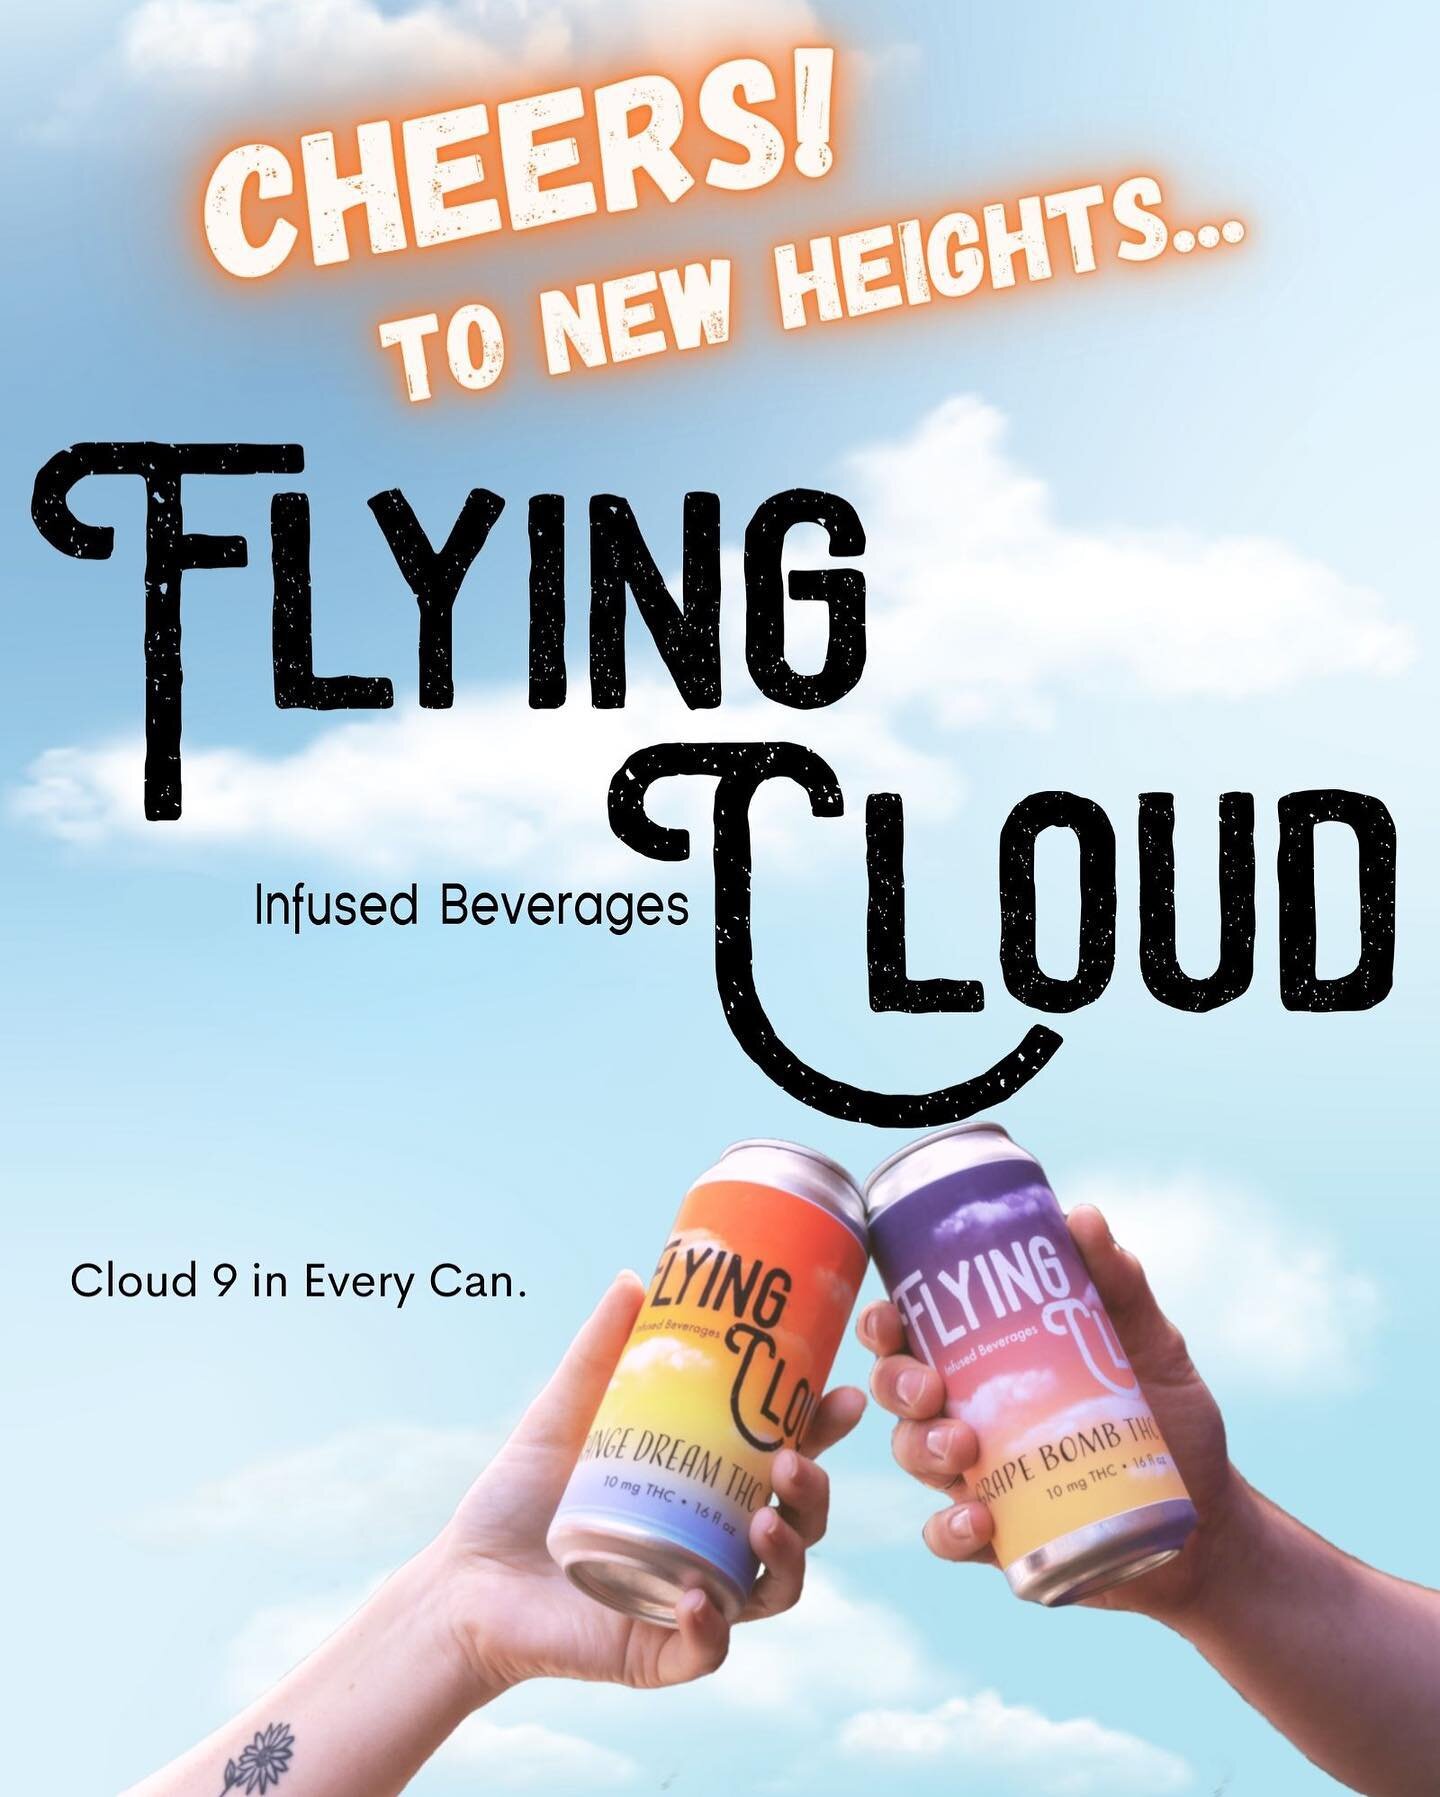 🍃Beer alternative🍃 Flying Cloud sodas are now available at select retailers!

Go give @flying.cloudthc a follow to support our new brand and check out the link in bio to see where they&rsquo;re available for purchase!

(Brewed in-house at Fat Pants